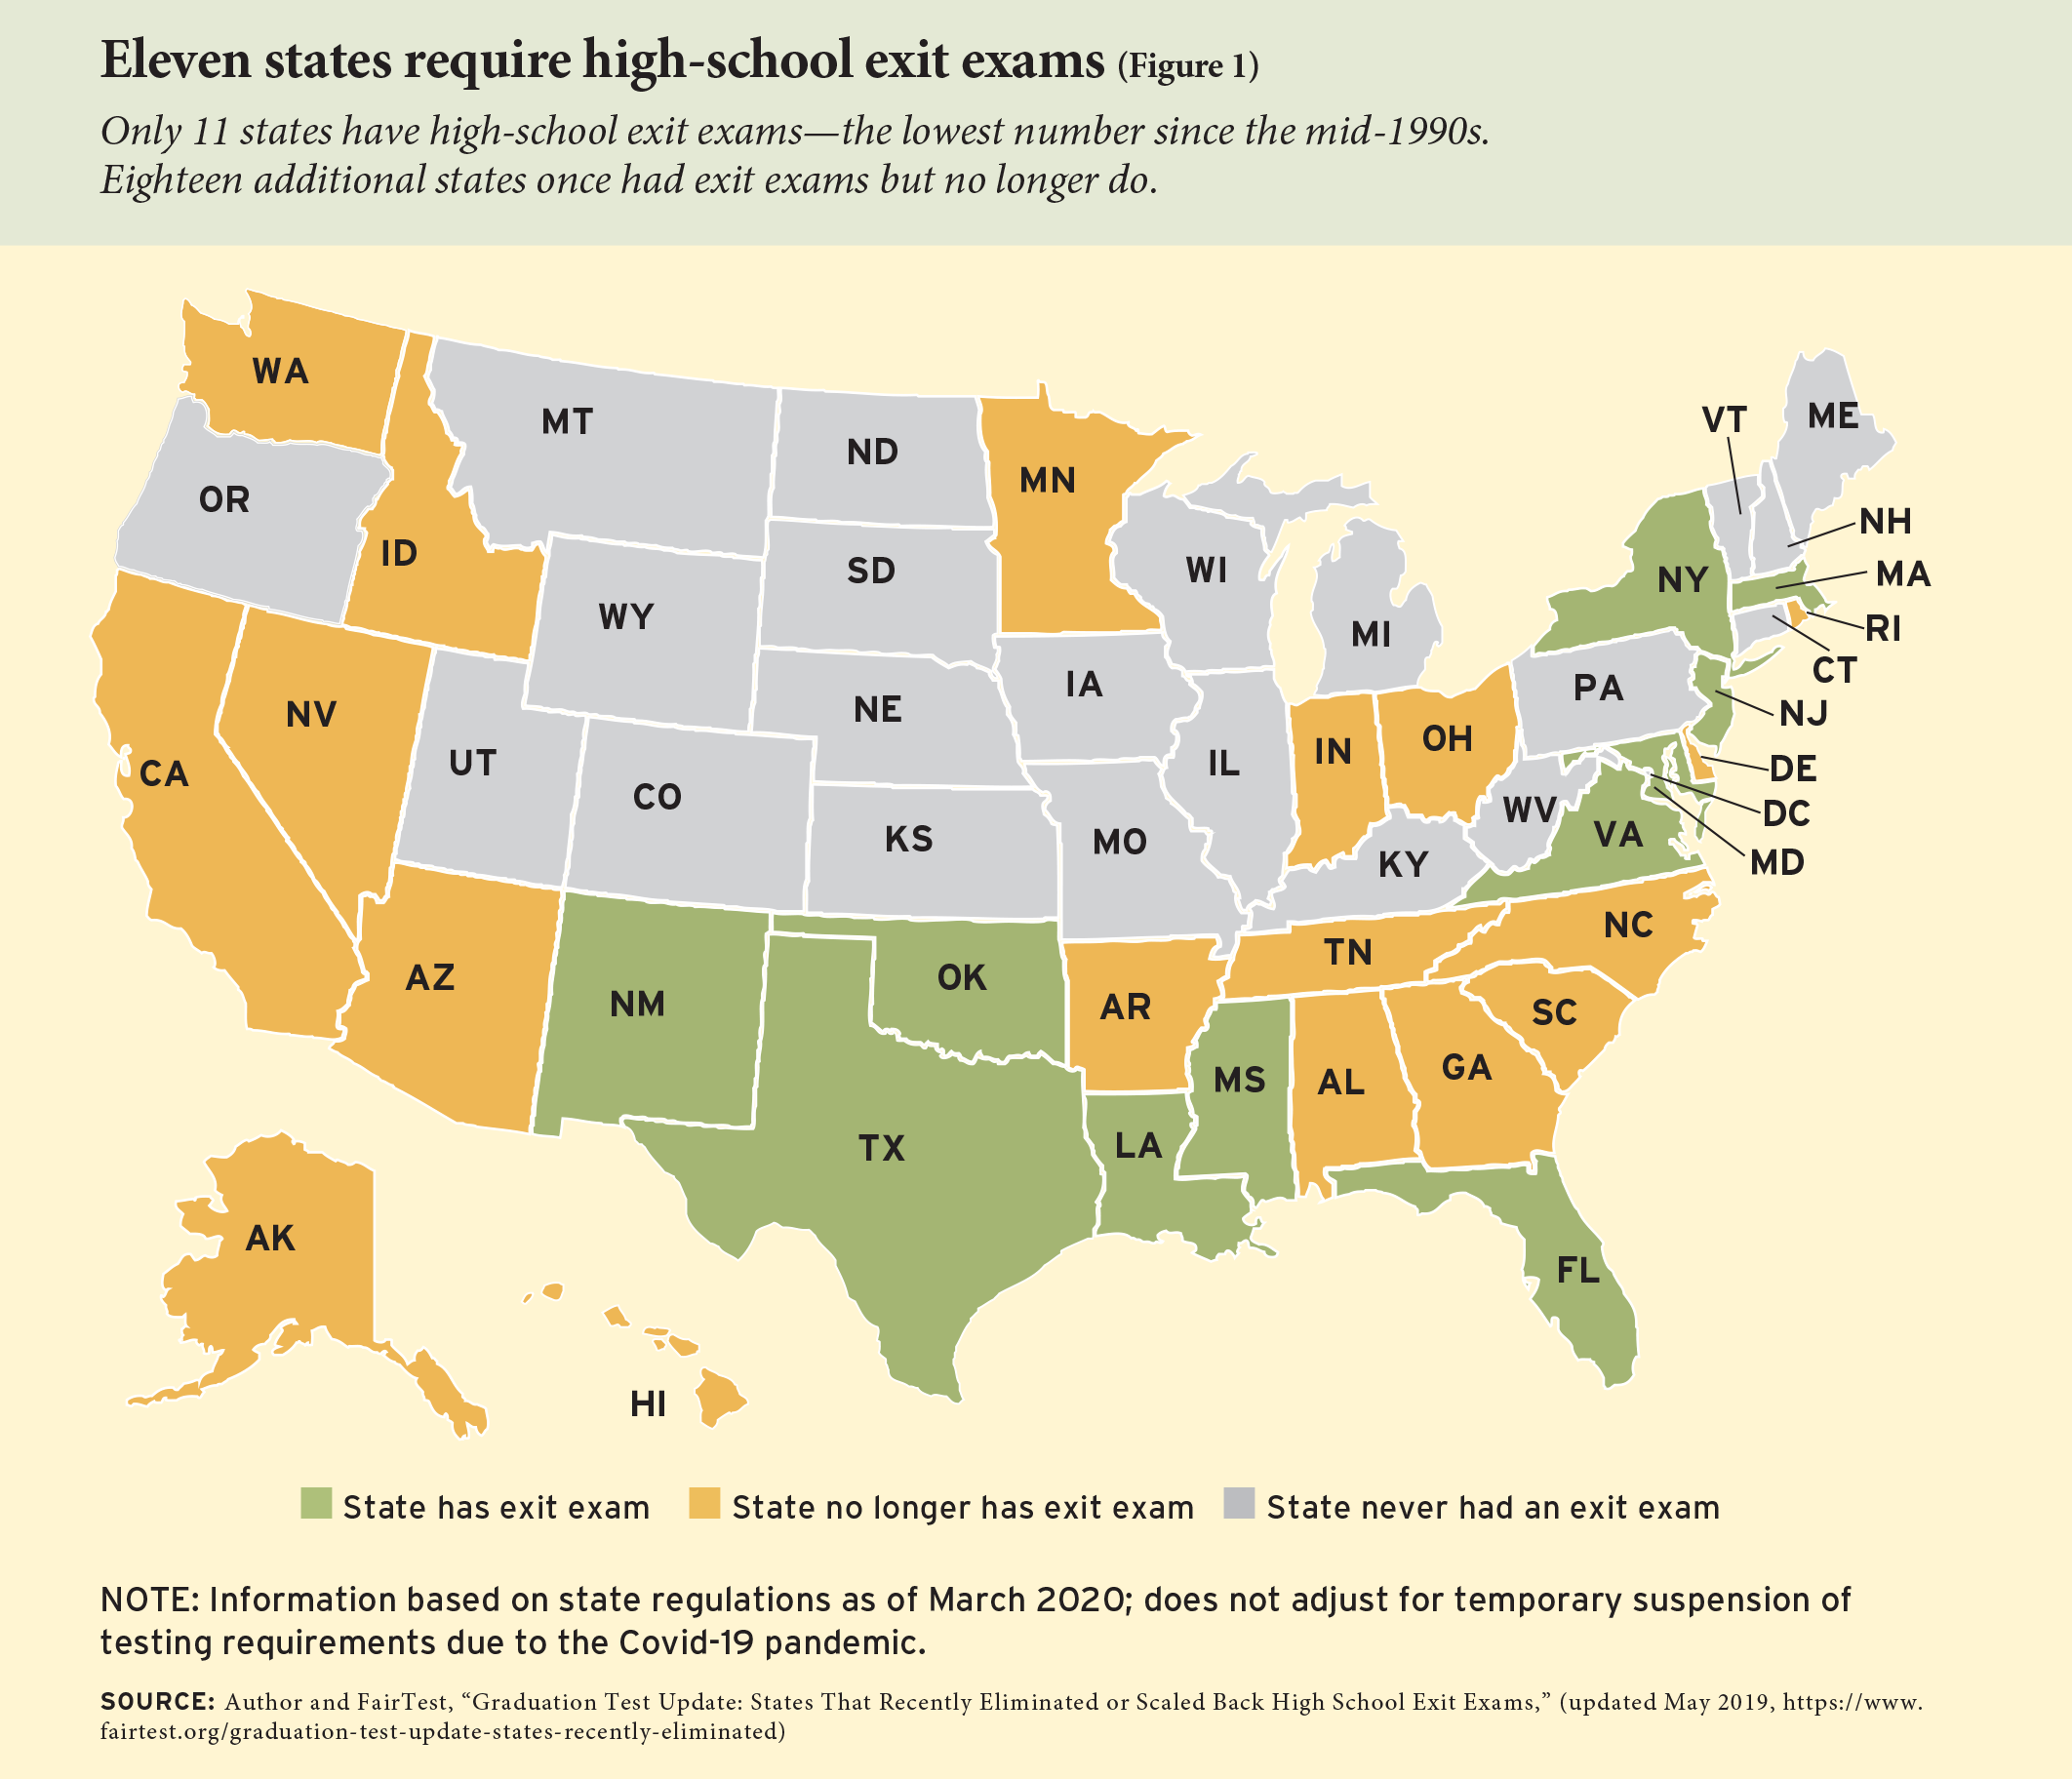 Eleven states require high-school exit exams (Figure 1)